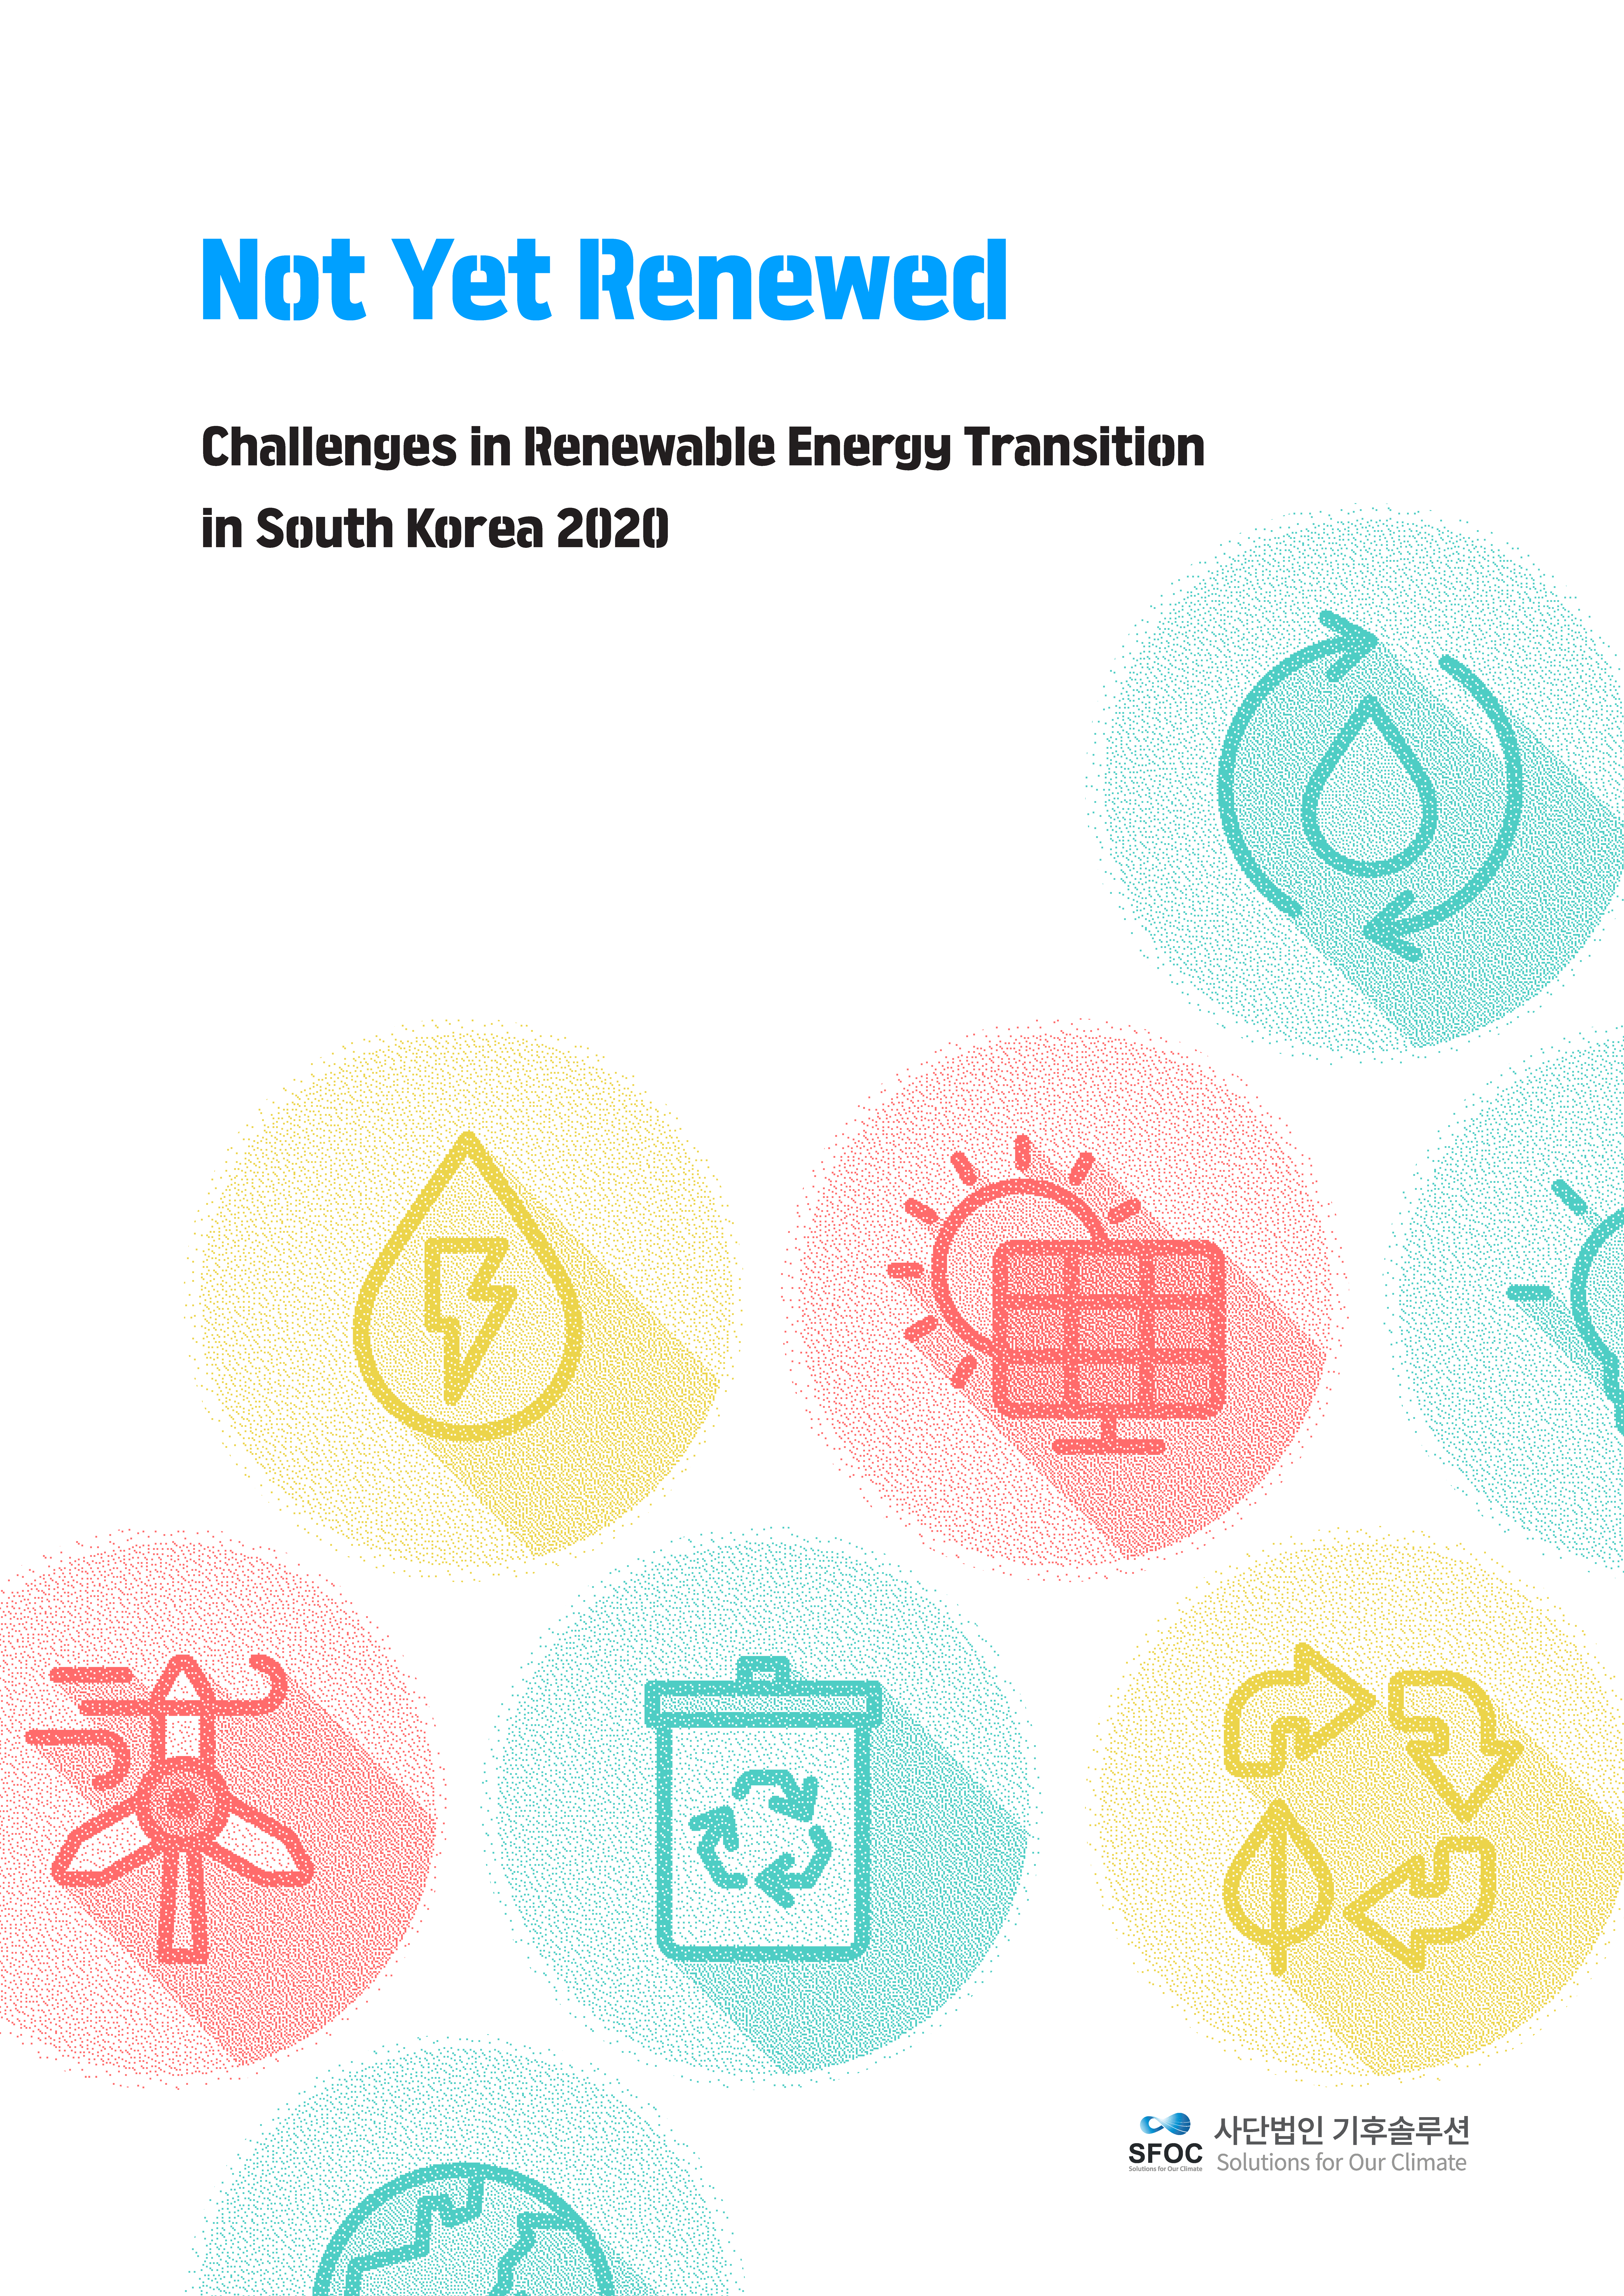 Not Yet Renewed: Challenges in Renewable Energy Transition in South Korea 2020